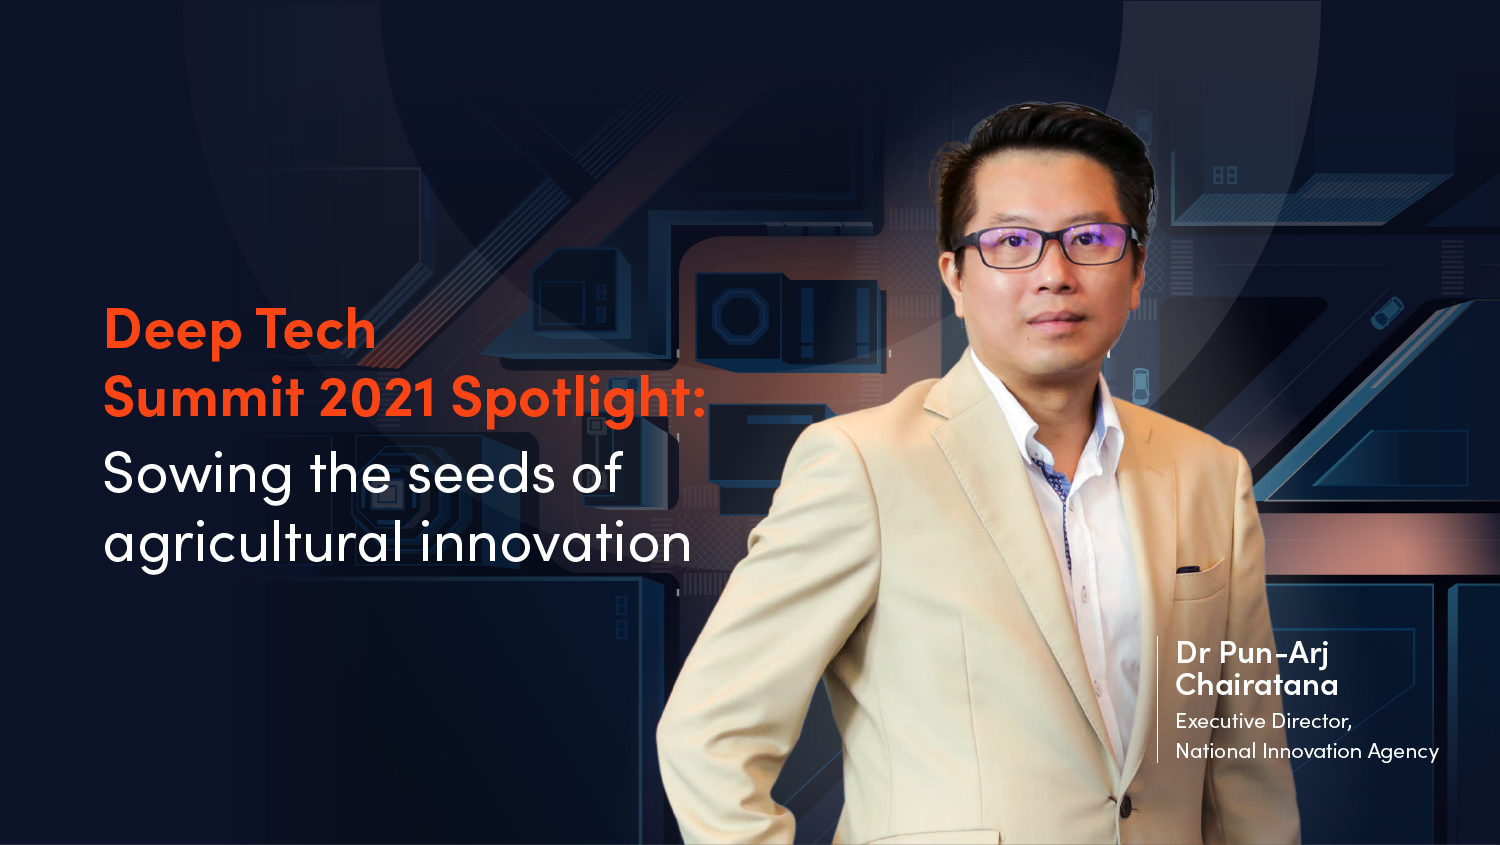 Deep Tech Summit 2021 Spotlight: Sowing the seeds of agricultural innovation